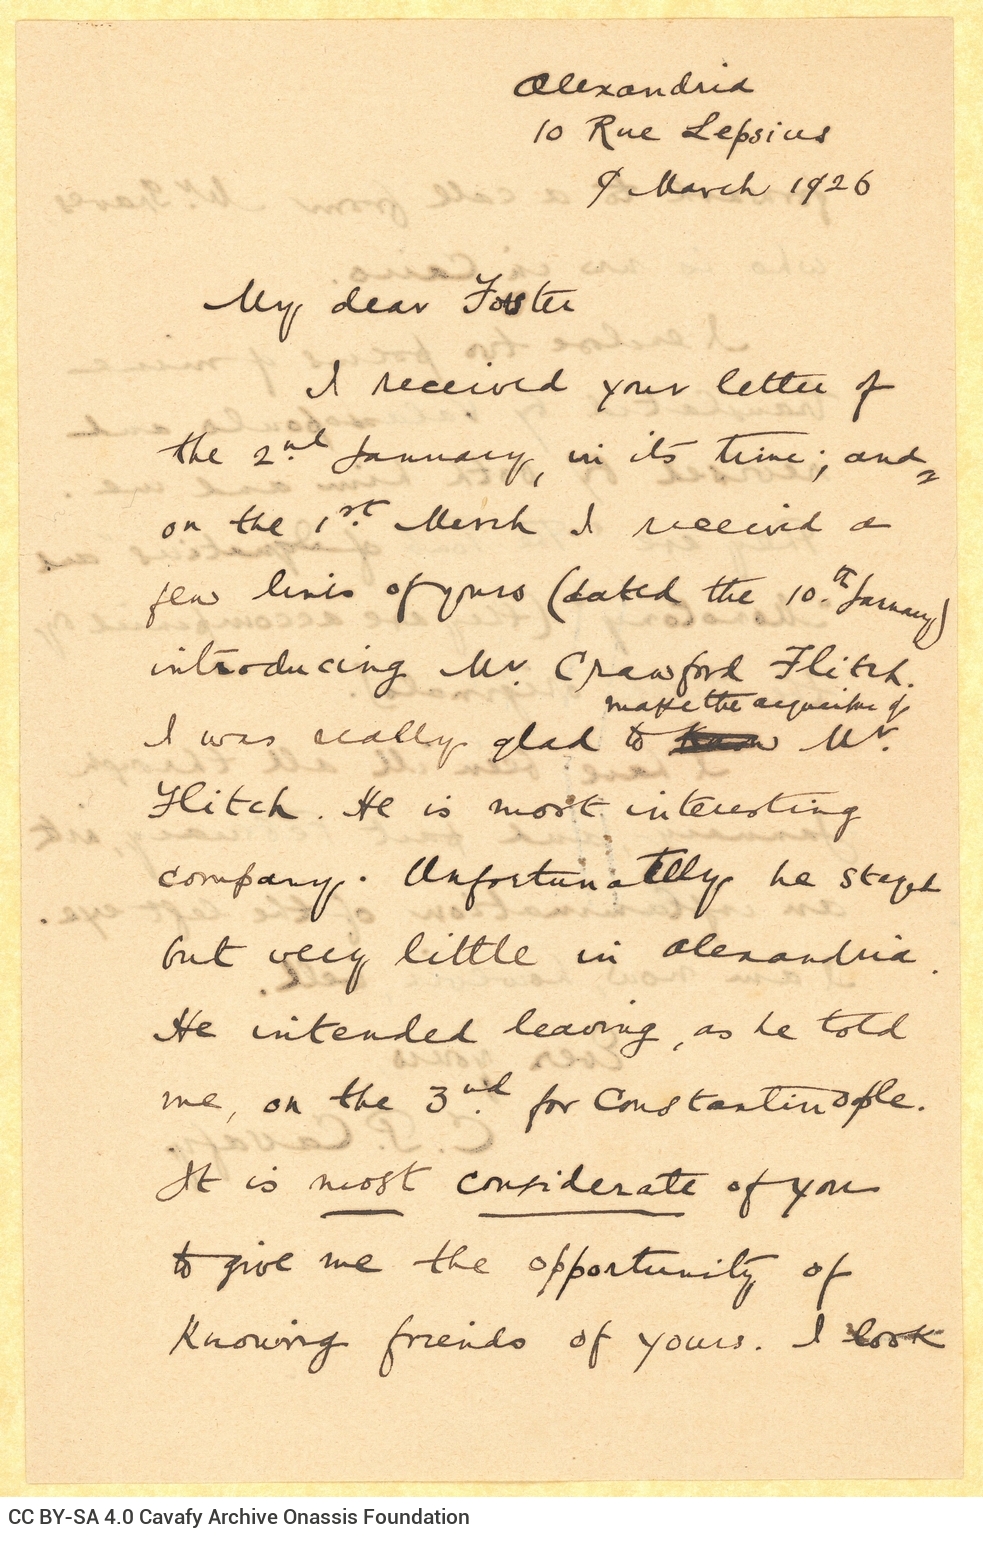 Handwritten copy of a letter by Cavafy to E. M. Forster on both sides of a sheet, with references to Crawford Flitch and Robe